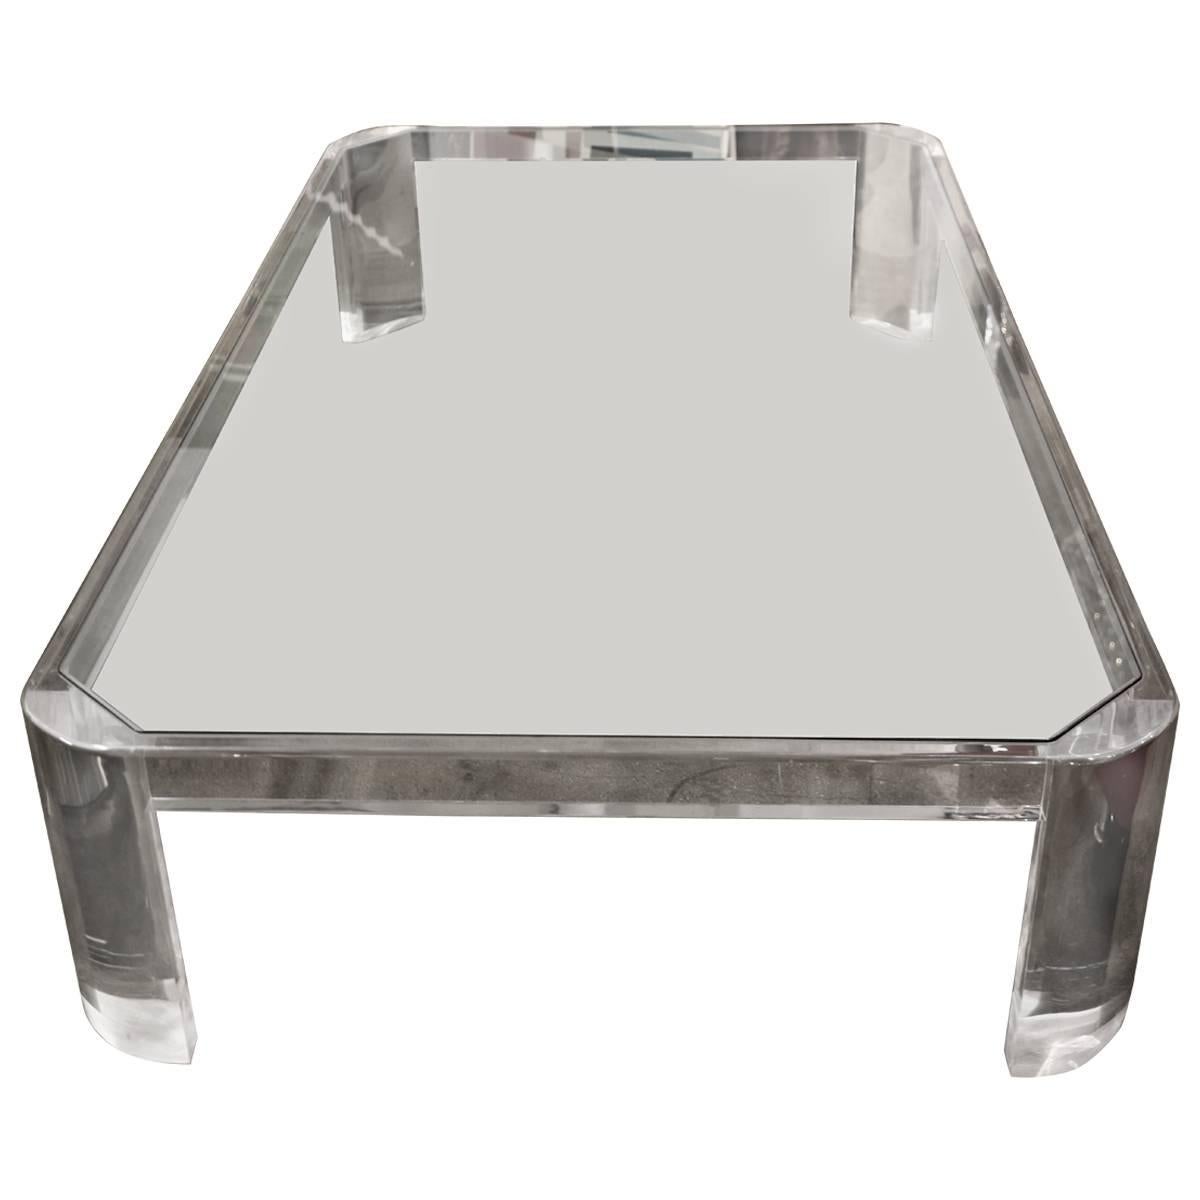 Large Lucite and Glass Coffee Table Likely by Steve Chase